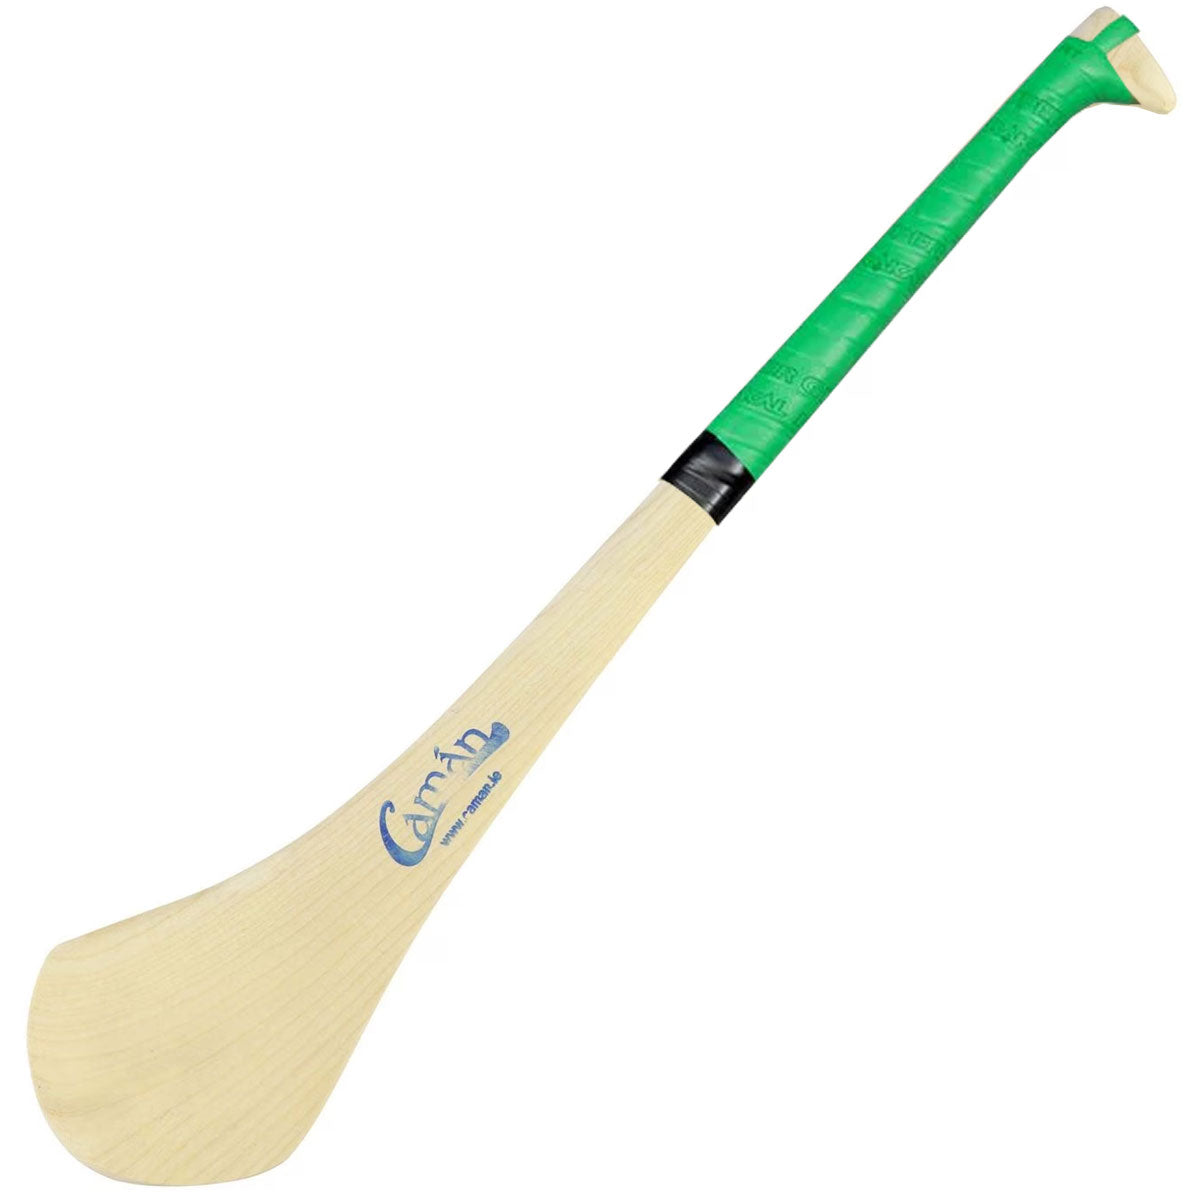 Caman Hurling Stick size 30 (Inches)